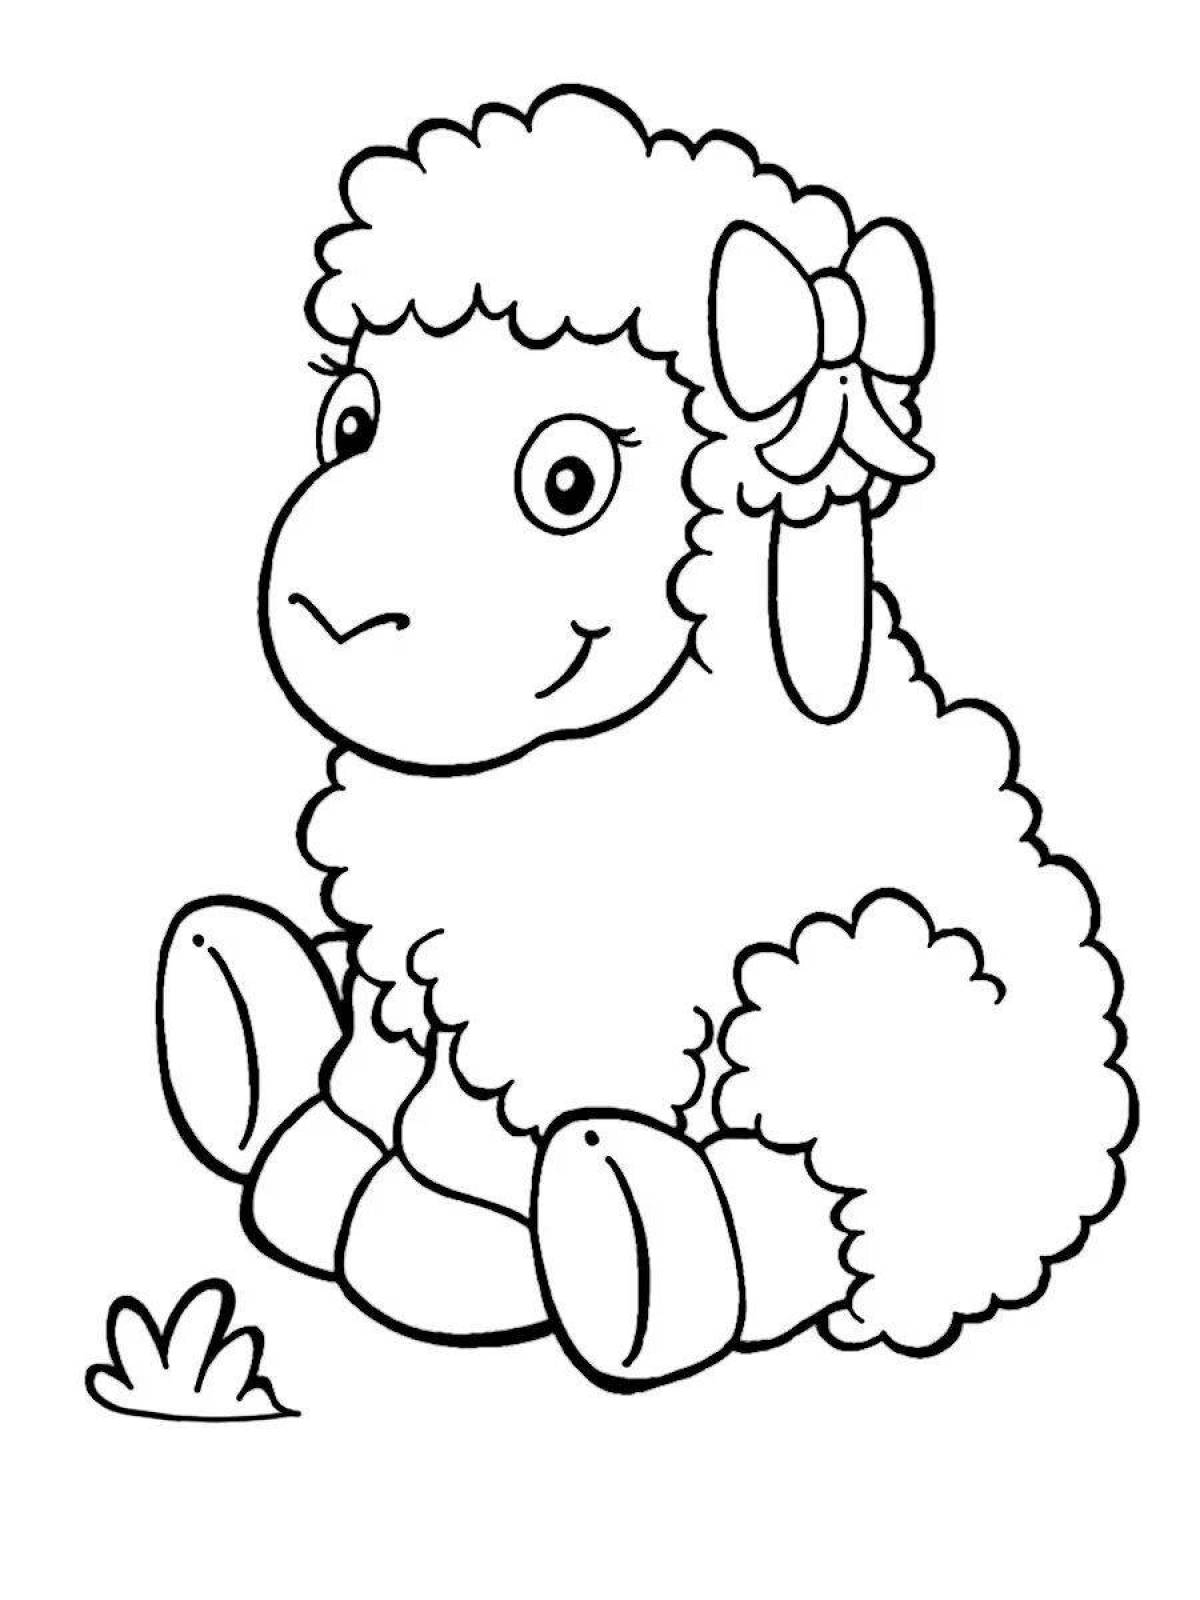 Blessed sheep coloring book for kids